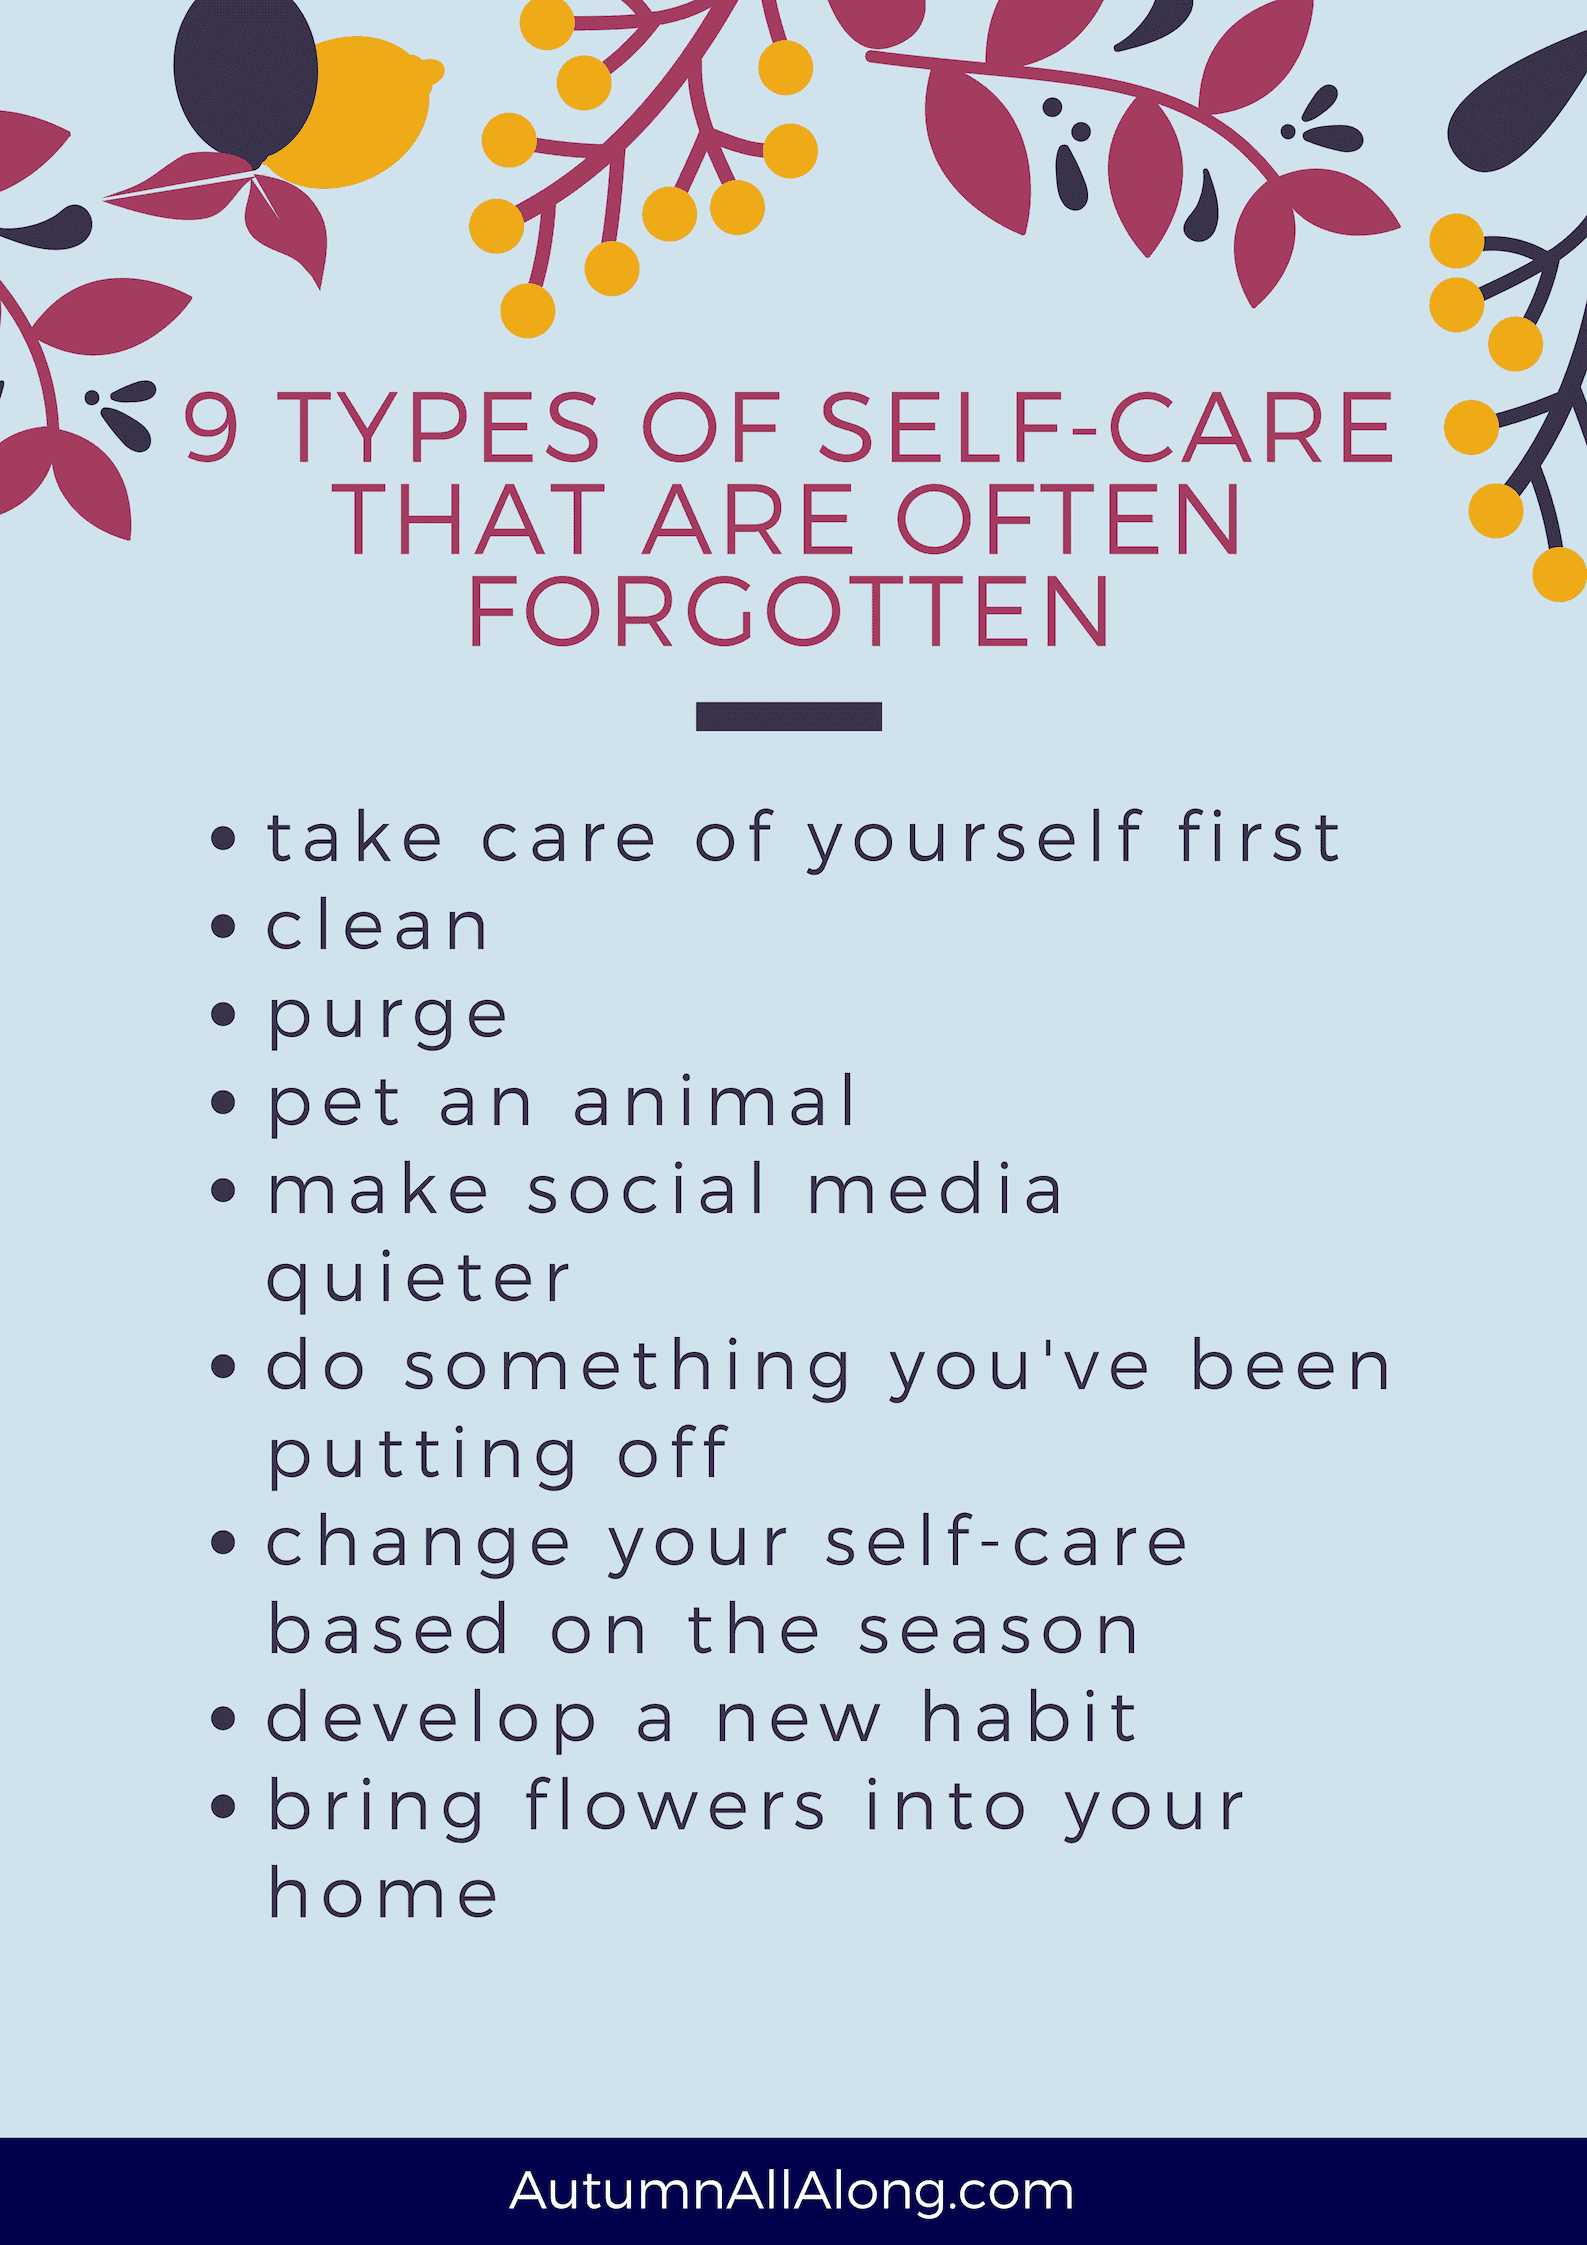 9 types of self-care that are often forgotten | via Autumn All Along